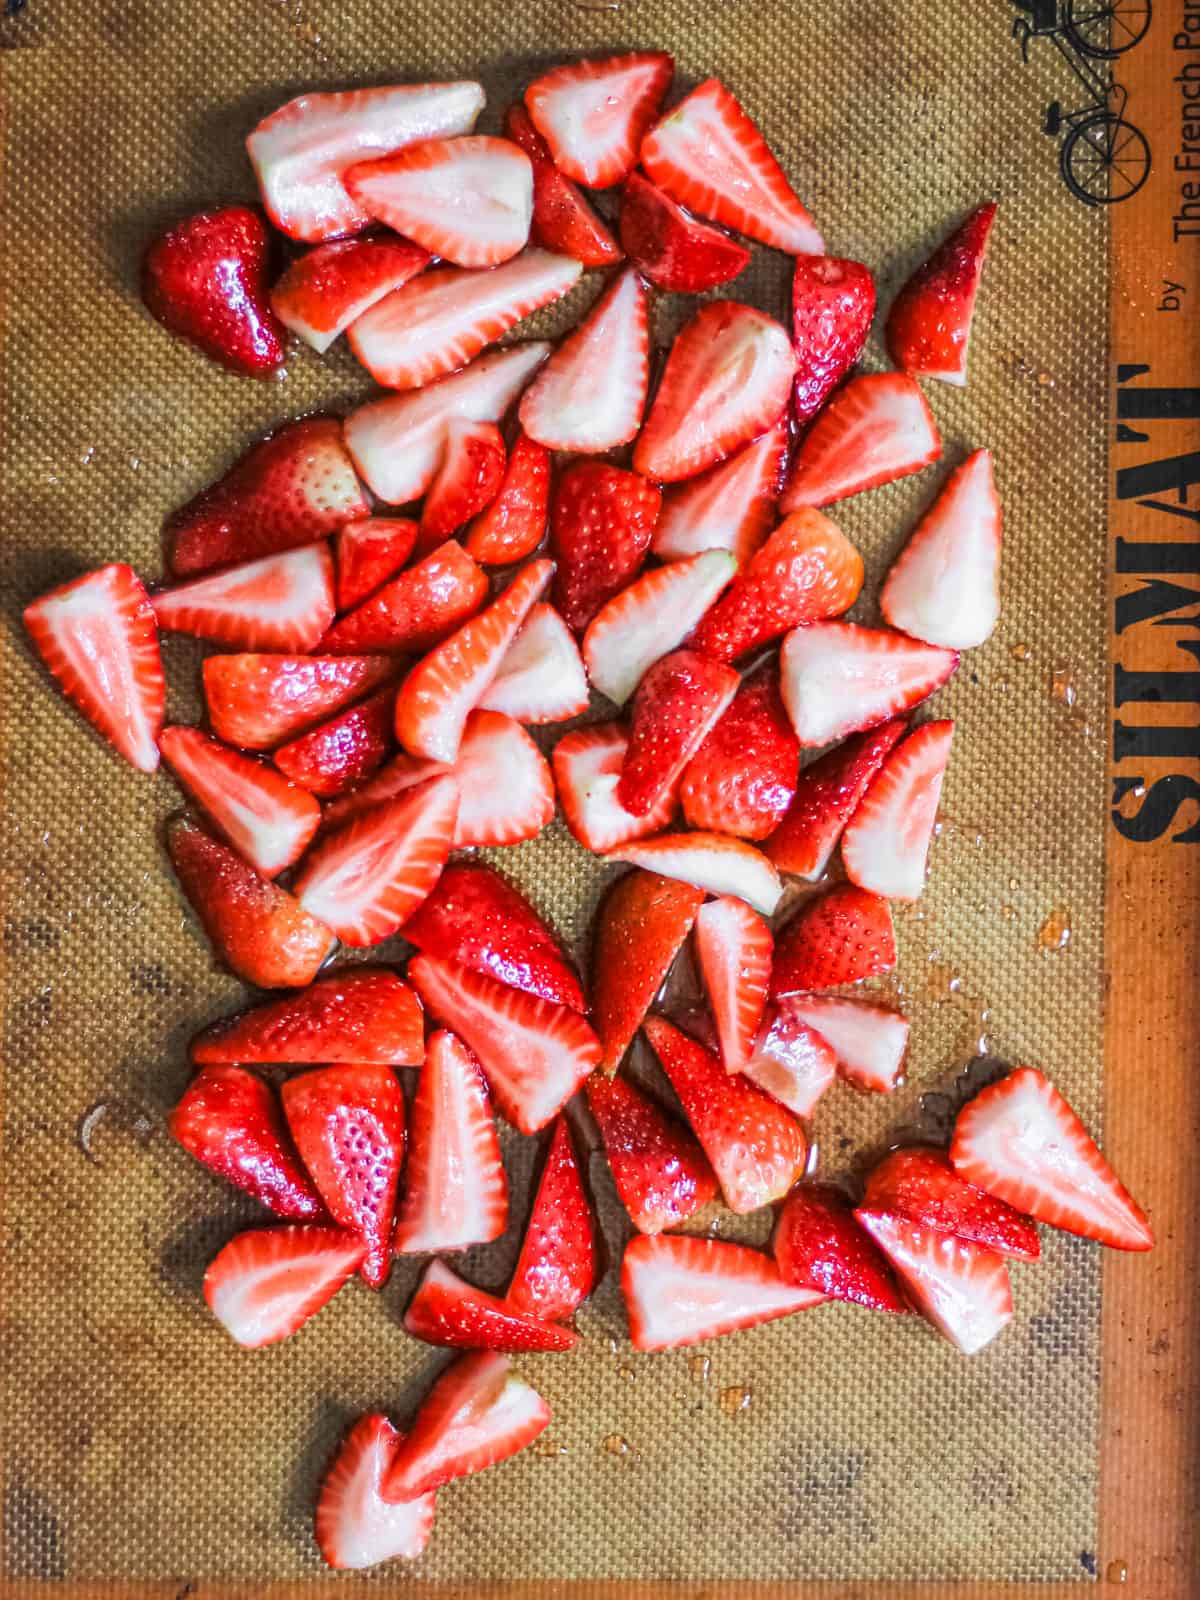 Up-close image of chopped strawberries on a baking sheet.